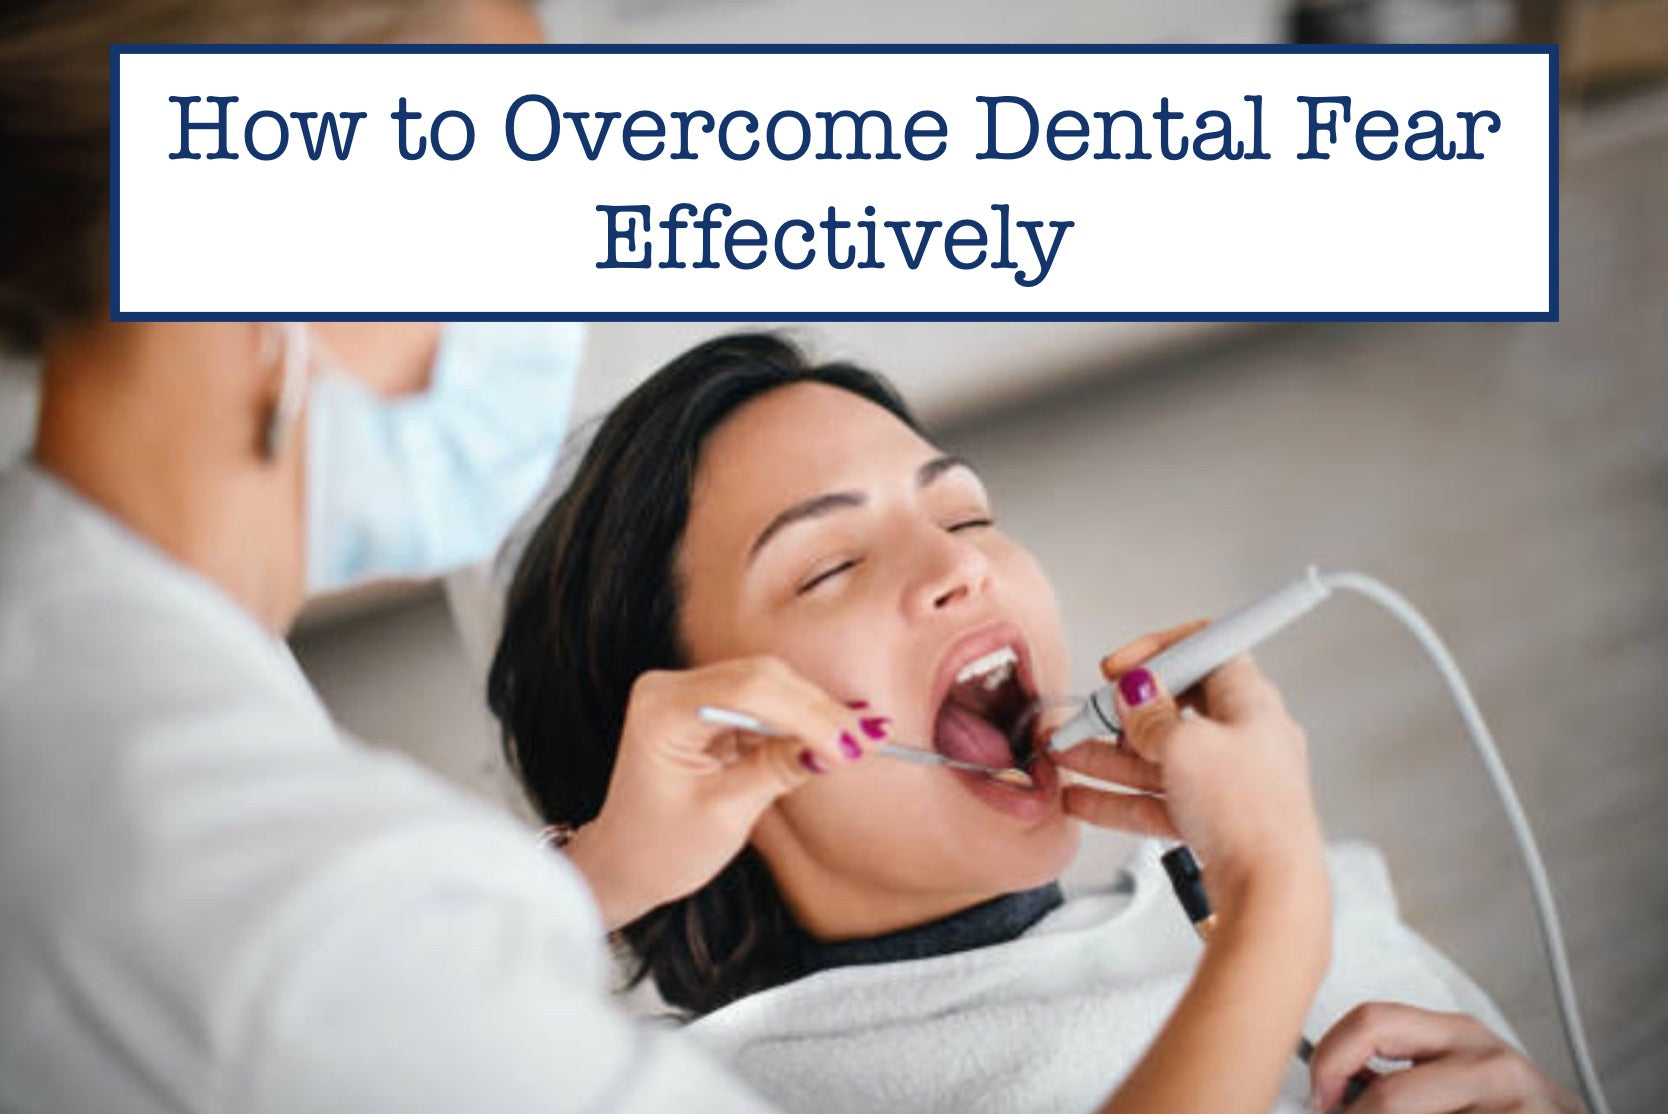 How to Overcome Dental Fear Effectively